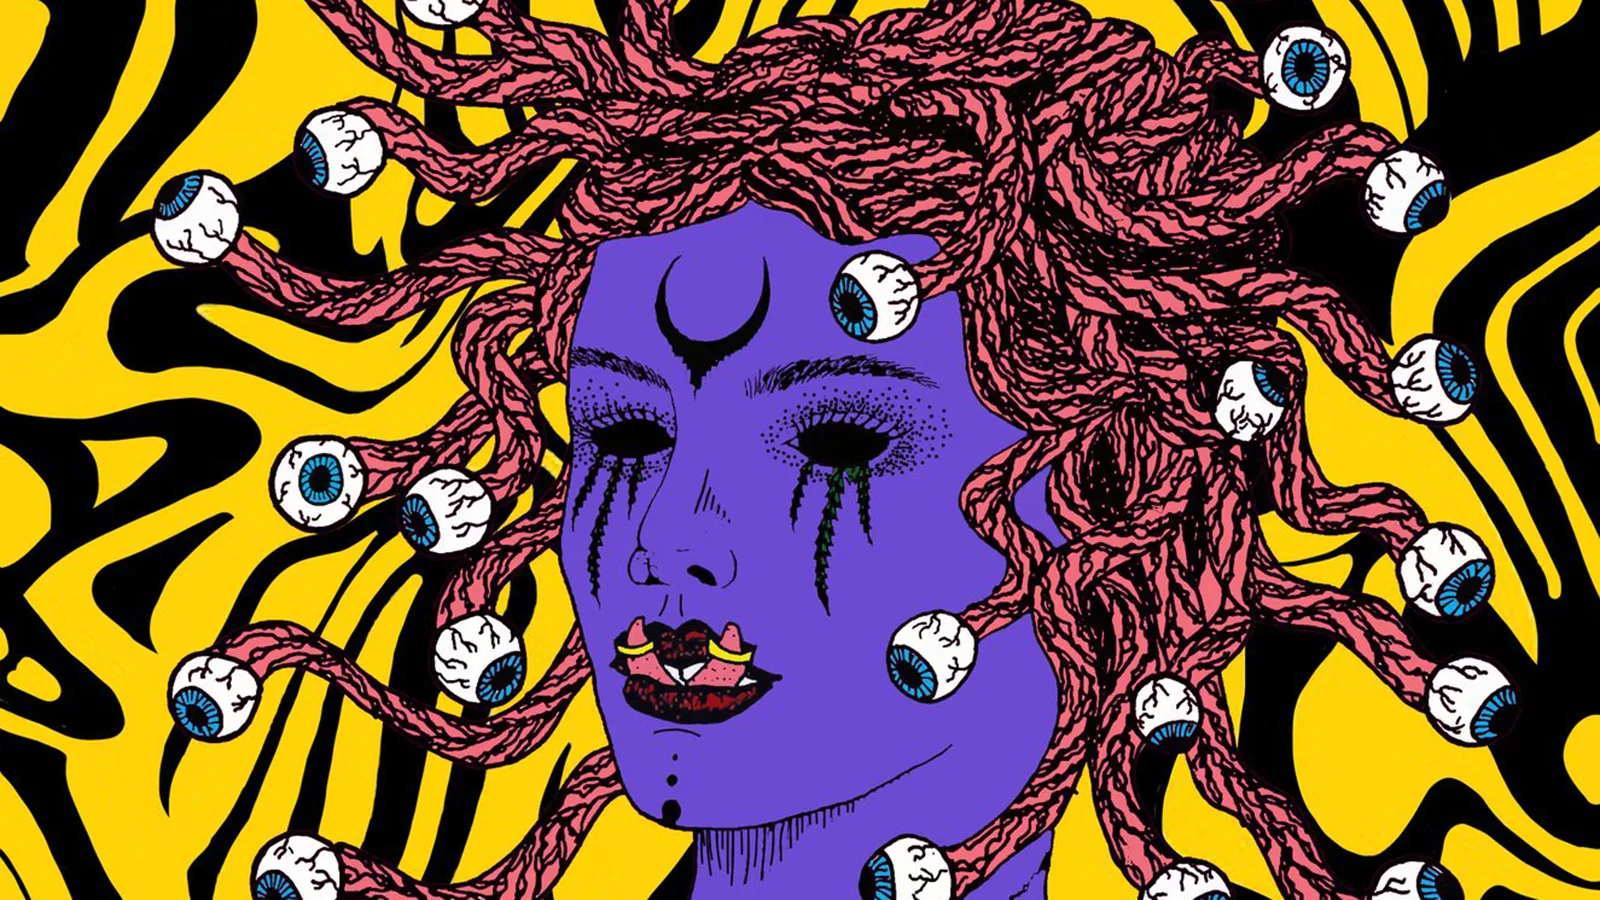 A poster for Crank the Dank. A purple medusa woman with braided hair with eyeballs on the end of each strand and a forked tongue against a black and yellow background